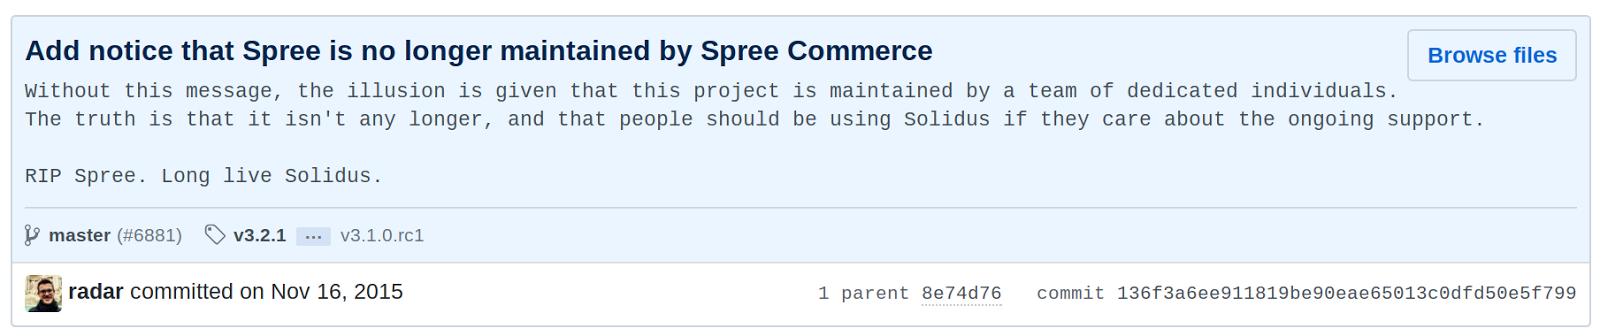 Notice that Spree is no longer maintained posted by Radar in November 2015